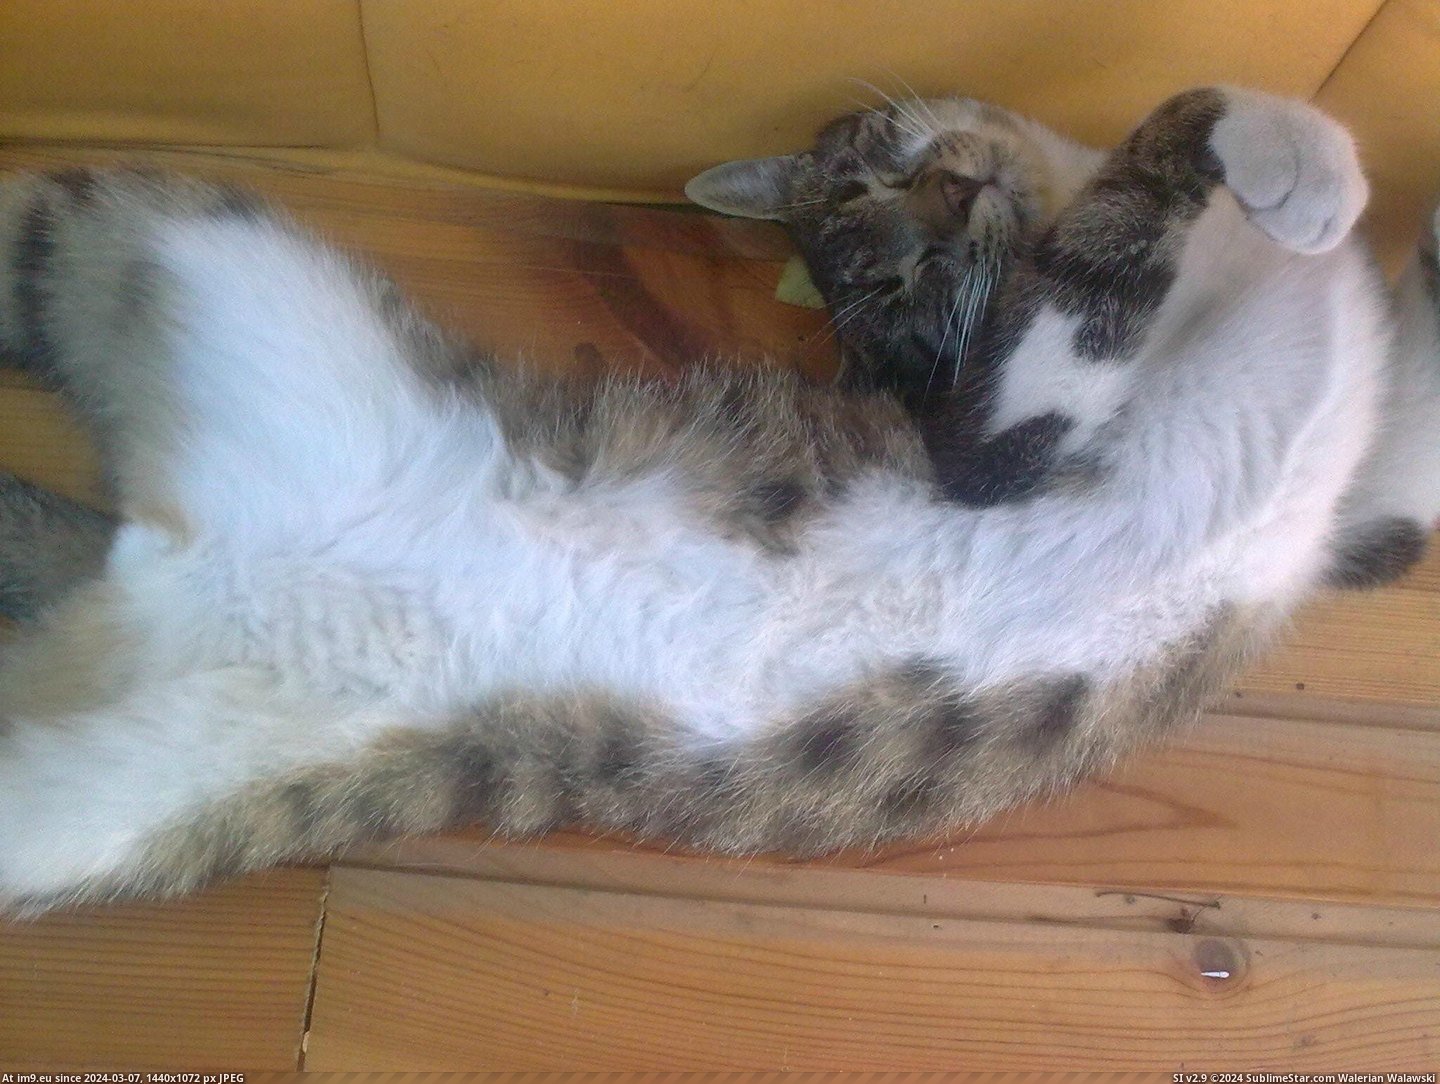 #Cats #Show #Rubs #Way #Belly [Cats] His way to show he wants belly rubs. Pic. (Bild von album My r/CATS favs))